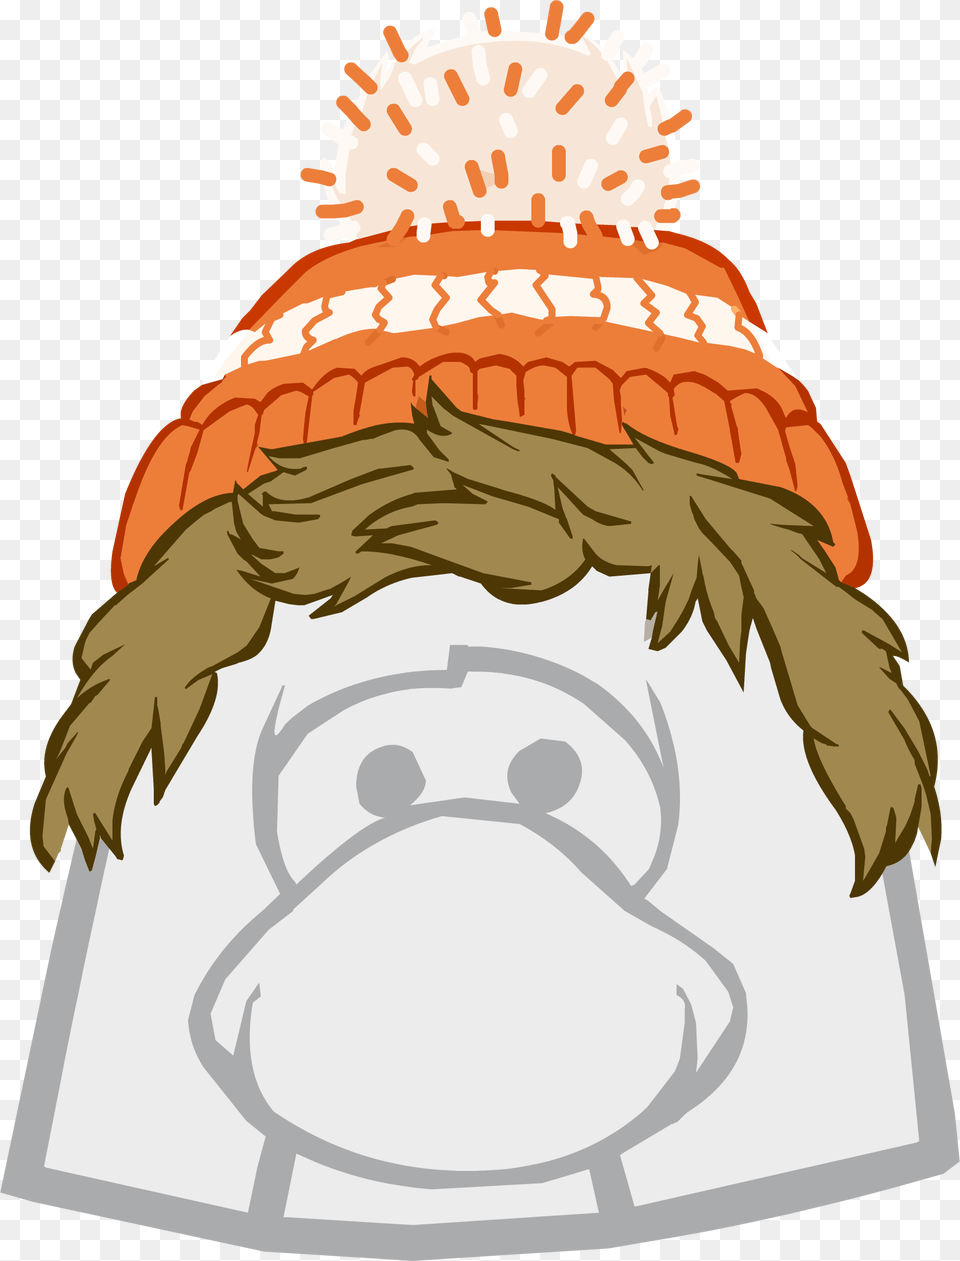 Official Club Penguin Online Wiki Club Penguin Blonde Hair, Hat, Cap, Clothing, Beanie Png Image